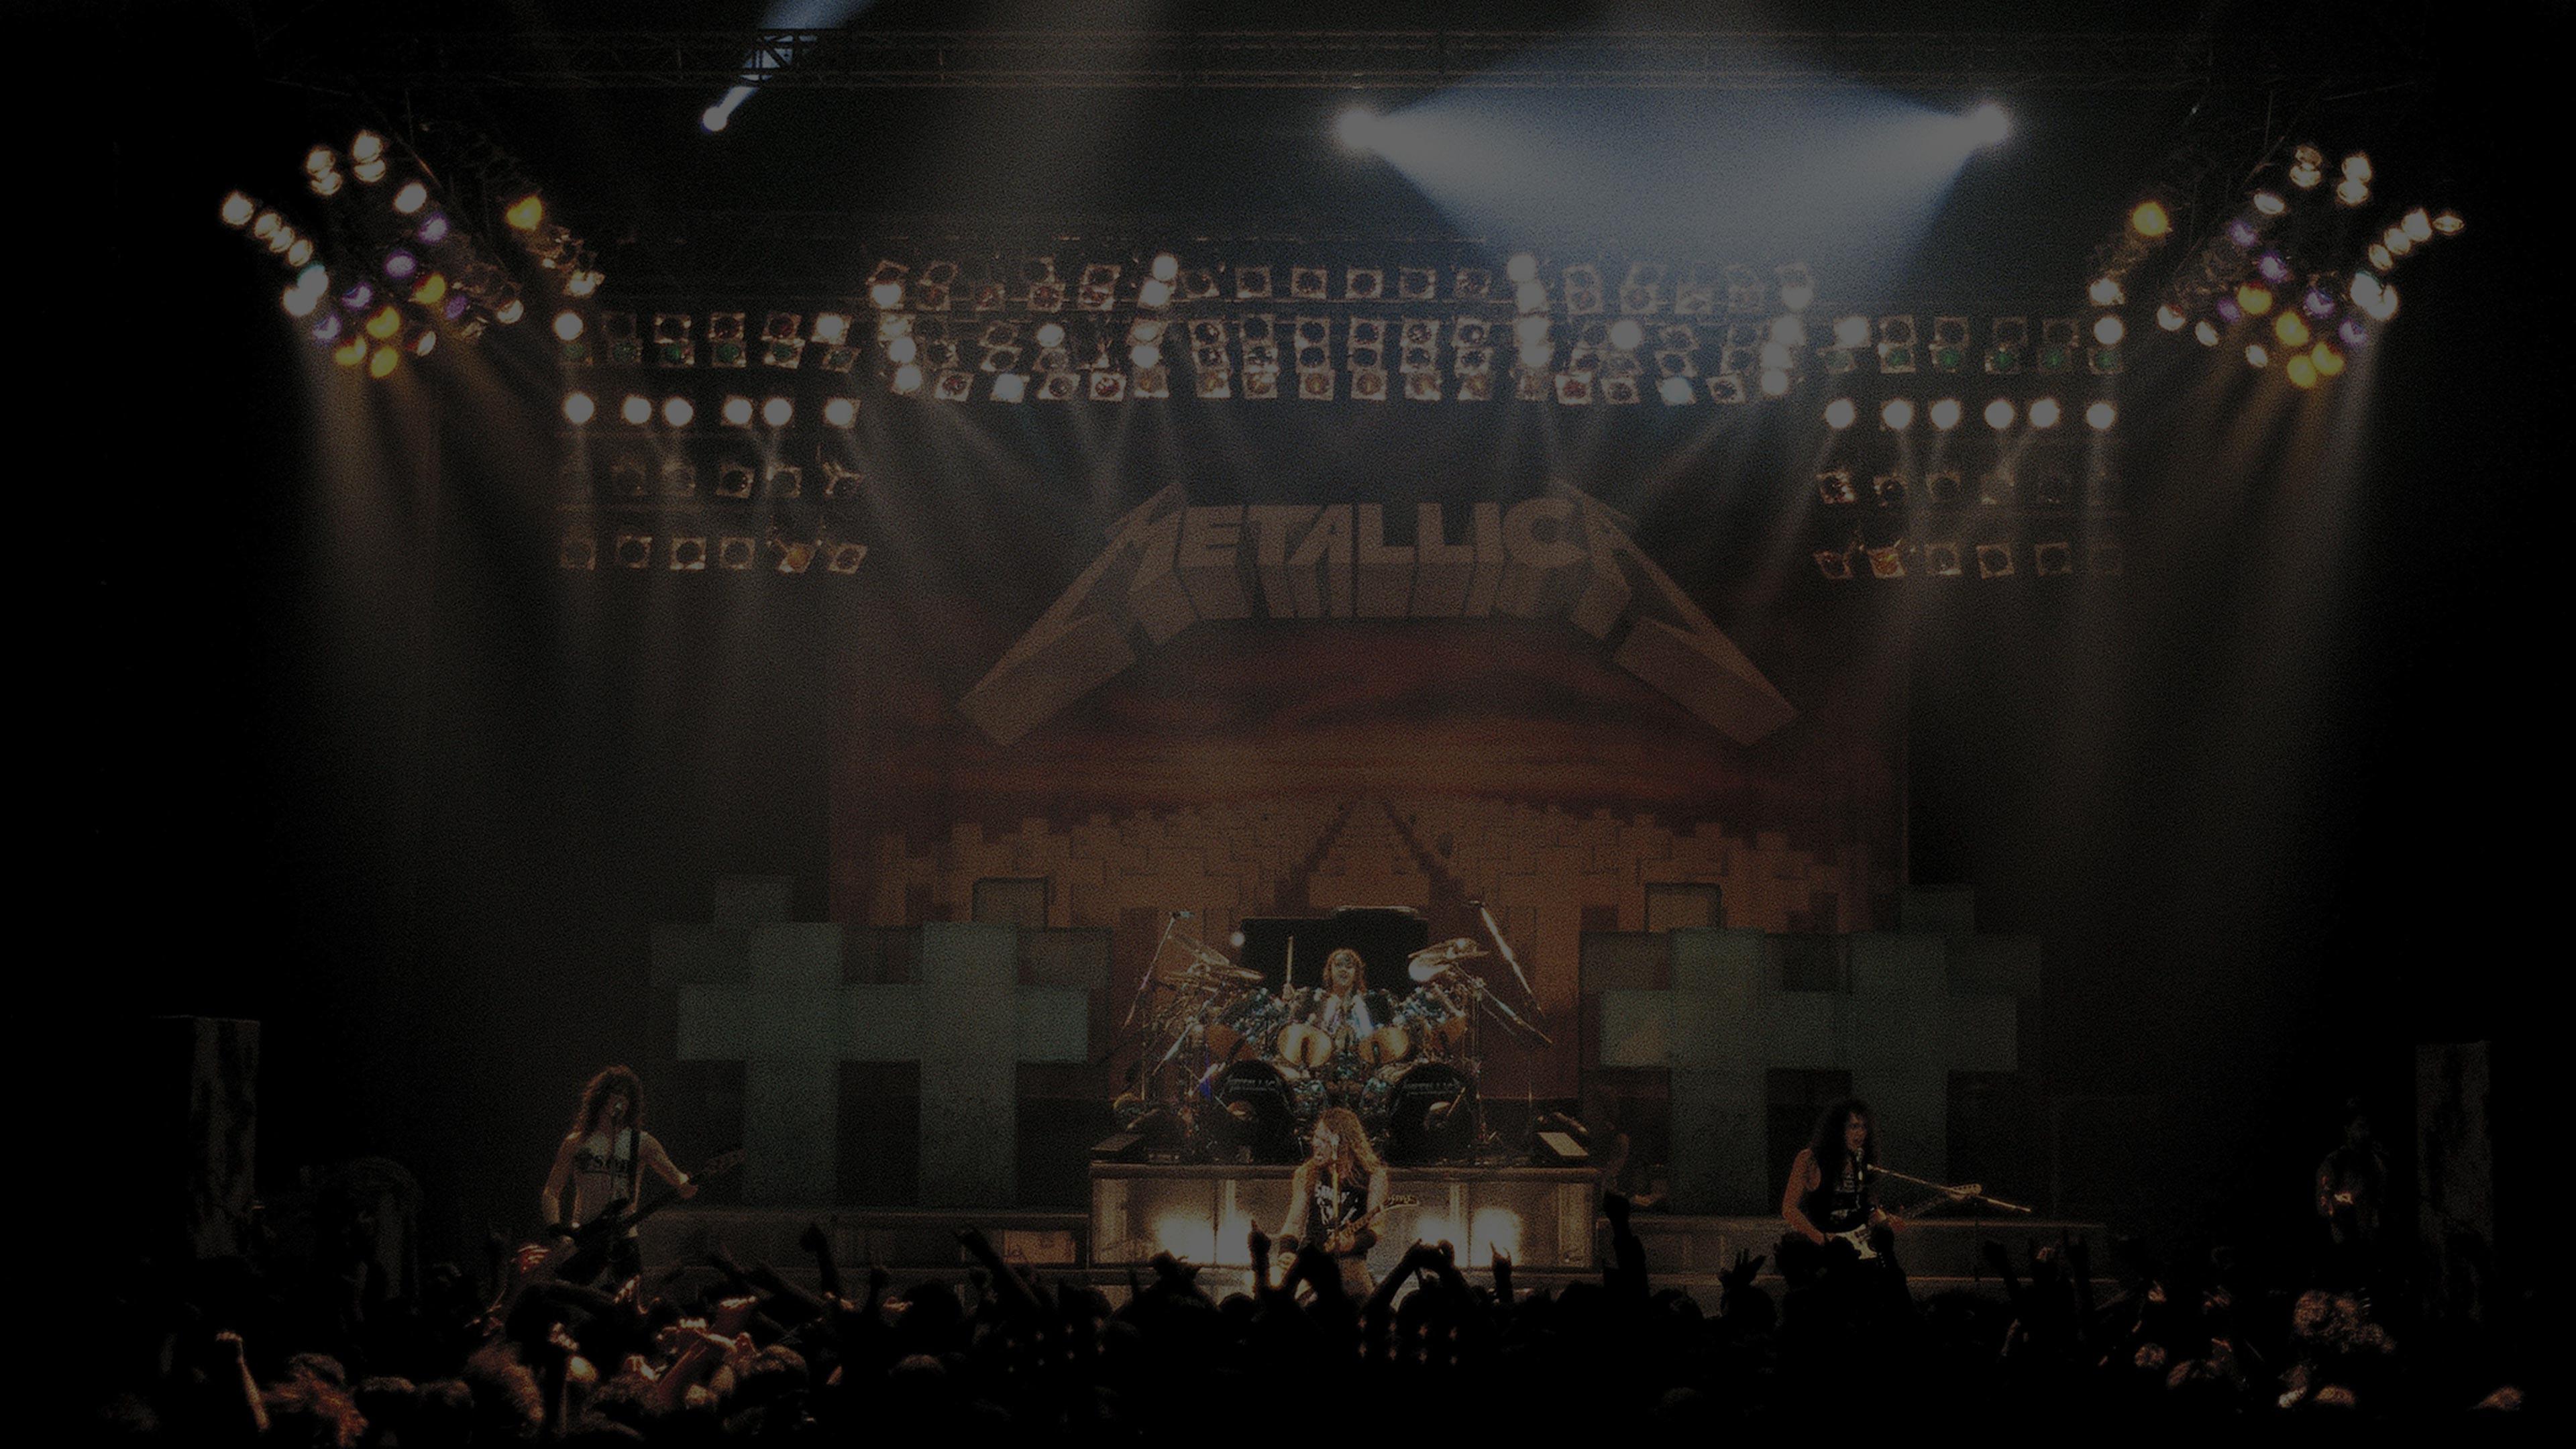 Metallica at Pantages Playhouse Theatre in Winnipeg, MB, Canada on December 13, 1986